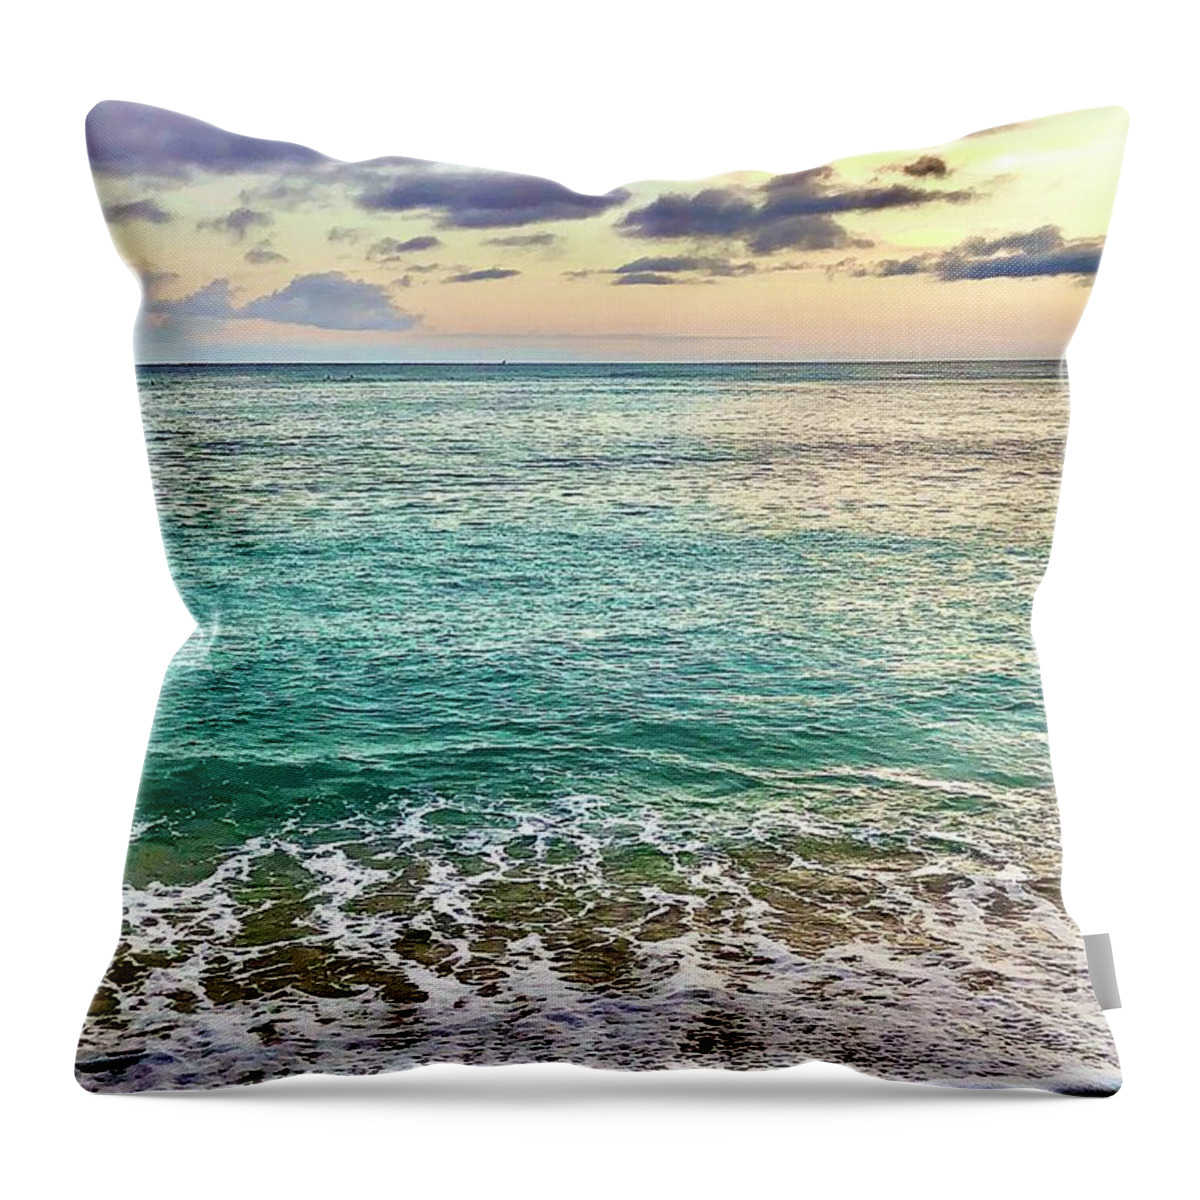 Blue Hawaii Throw Pillow featuring the photograph Blue Hawaii by Carol Riddle